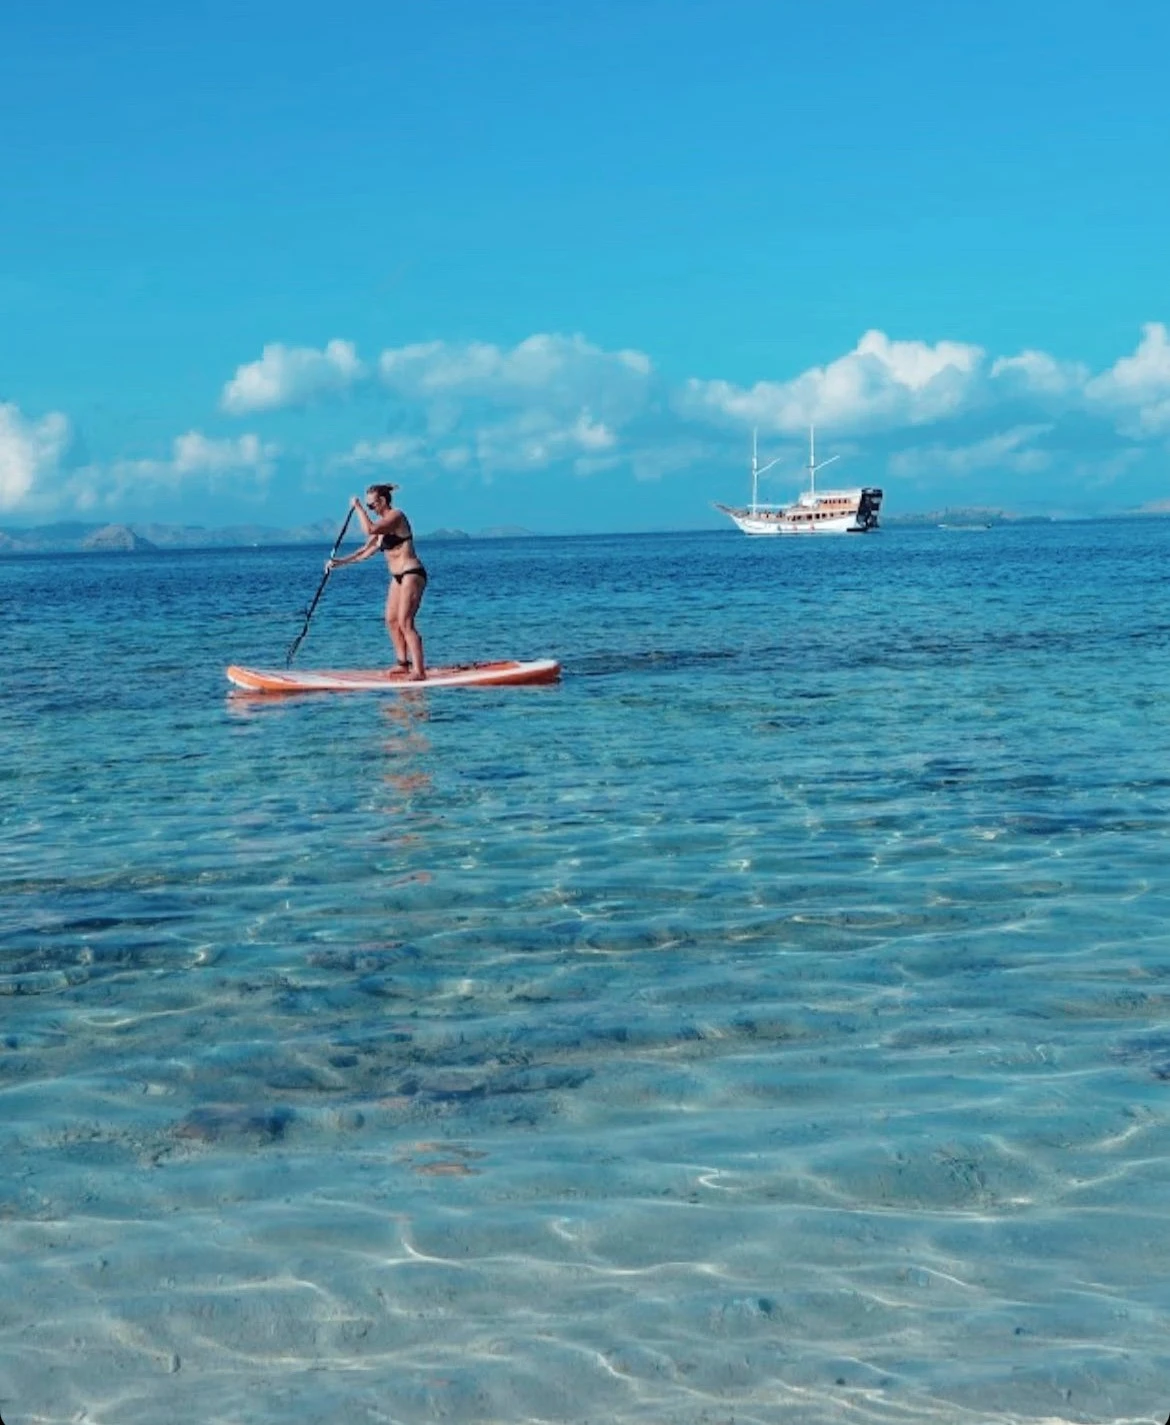 Stand up paddle boarding around Kelor Island